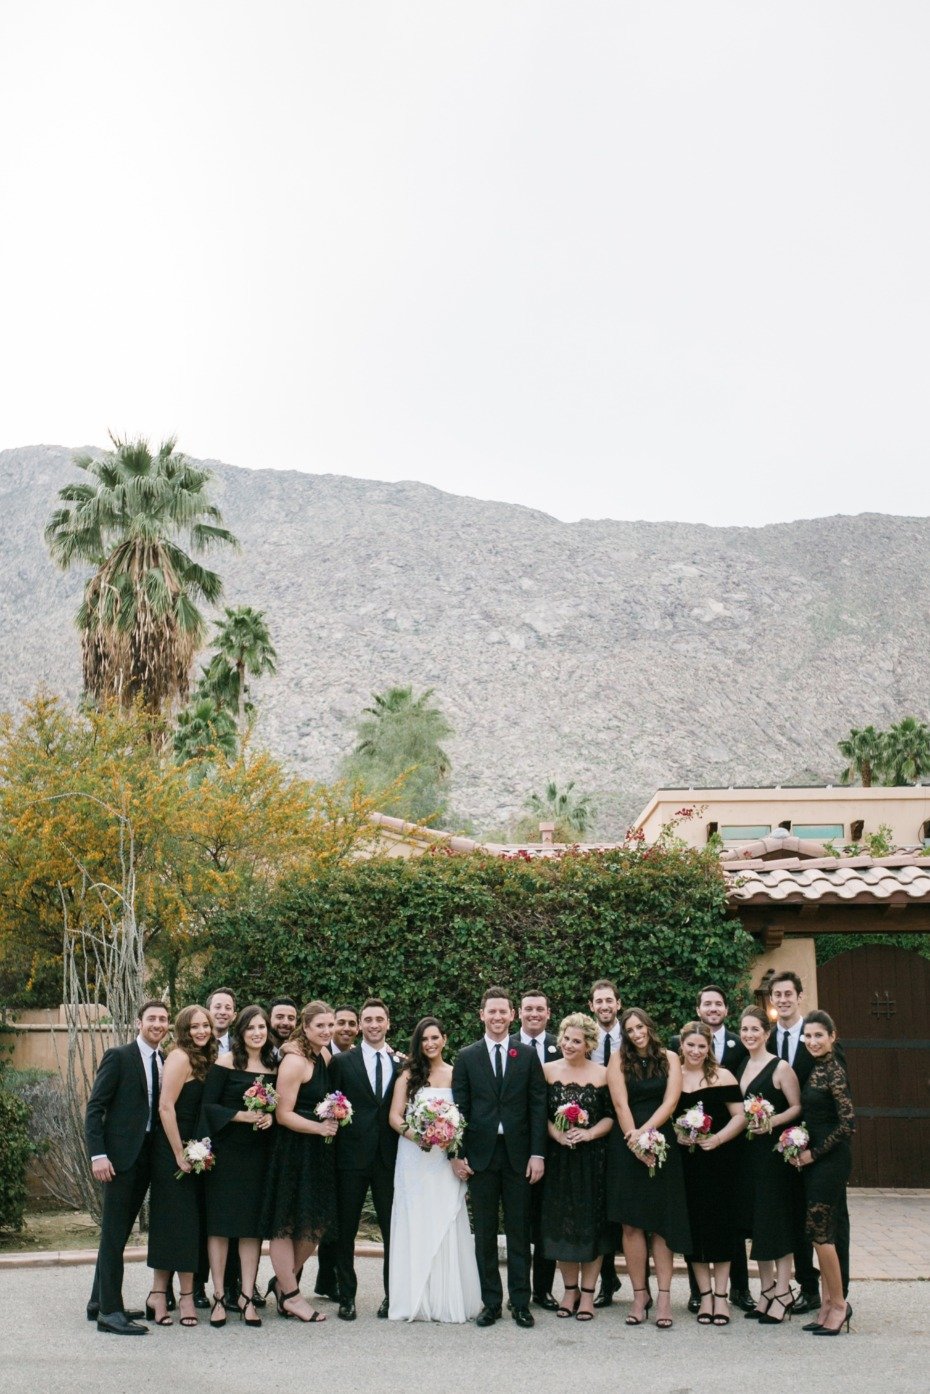 Chic wedding party in black